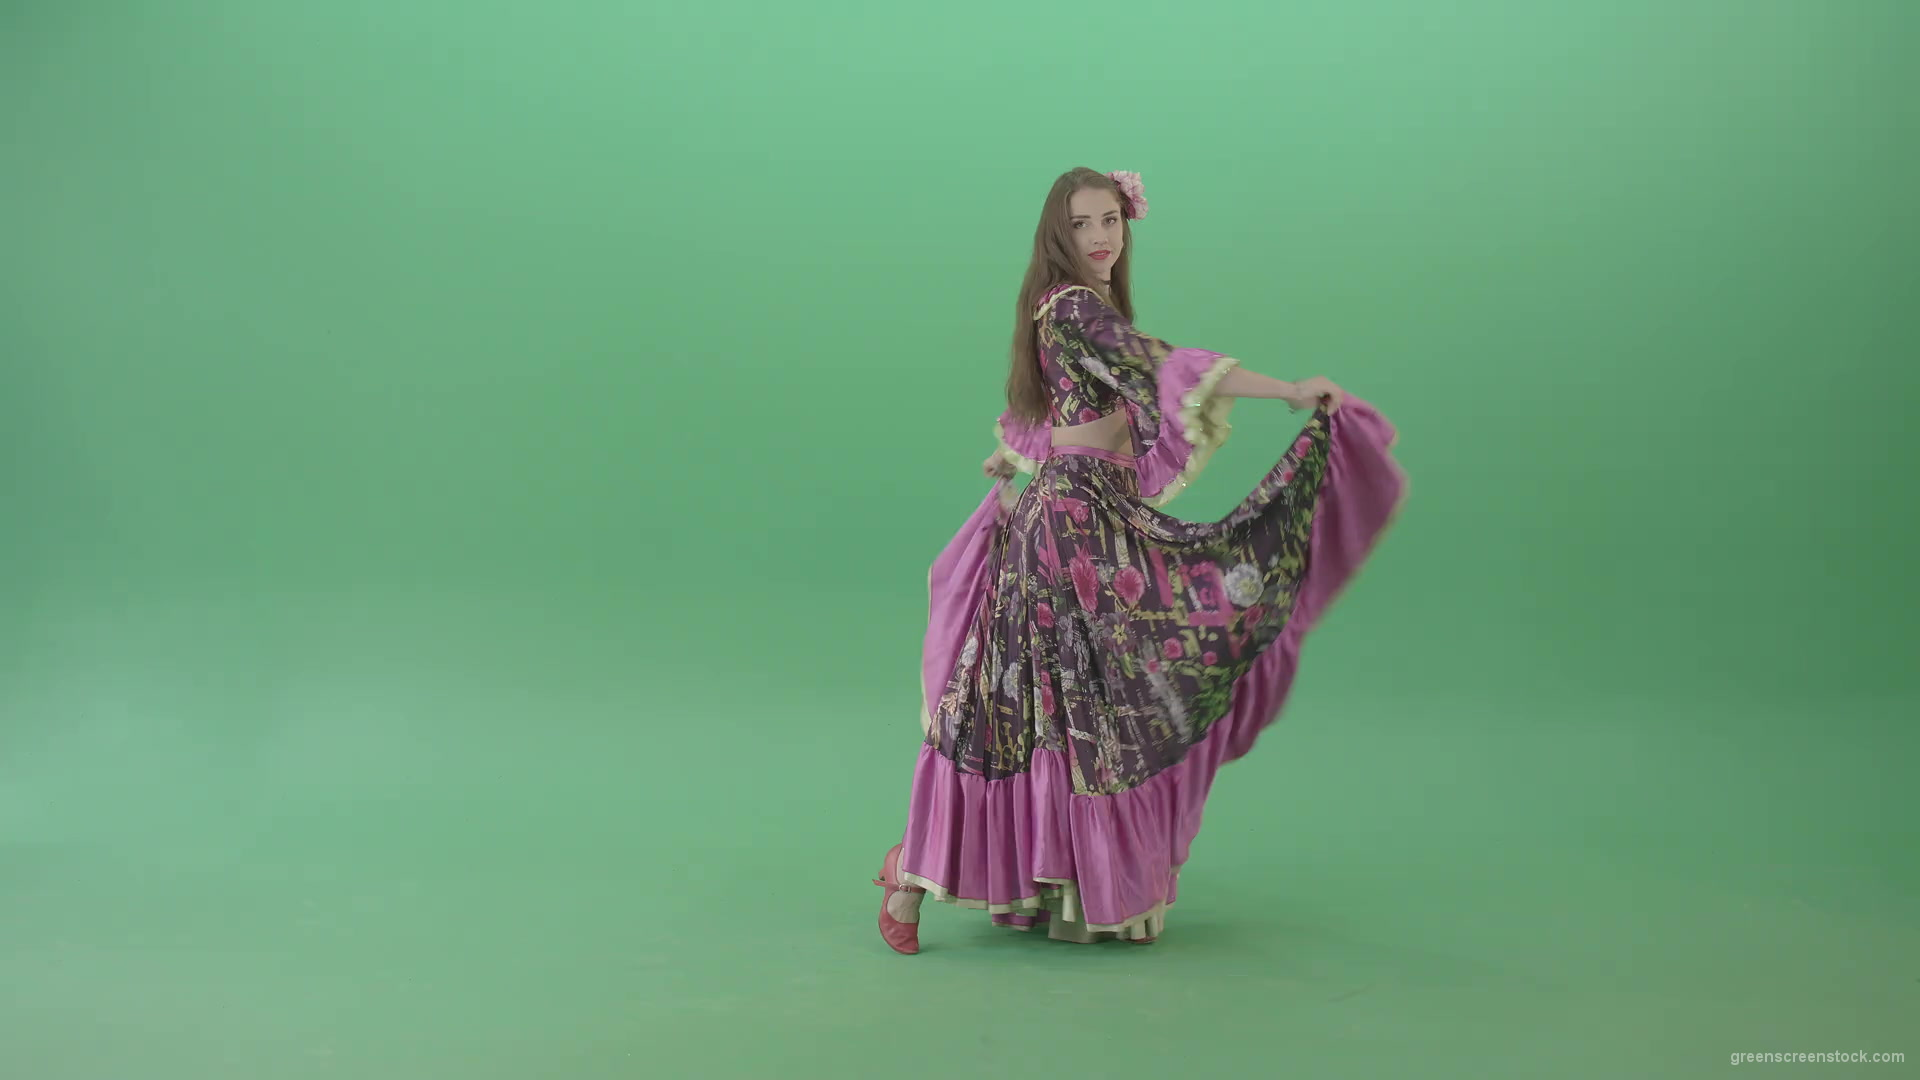 Romatic-moldova-girl-dancing-in-roma-gypsy-dress-isolated-on-green-screen-4K-stock-video-footage-1920_001 Green Screen Stock